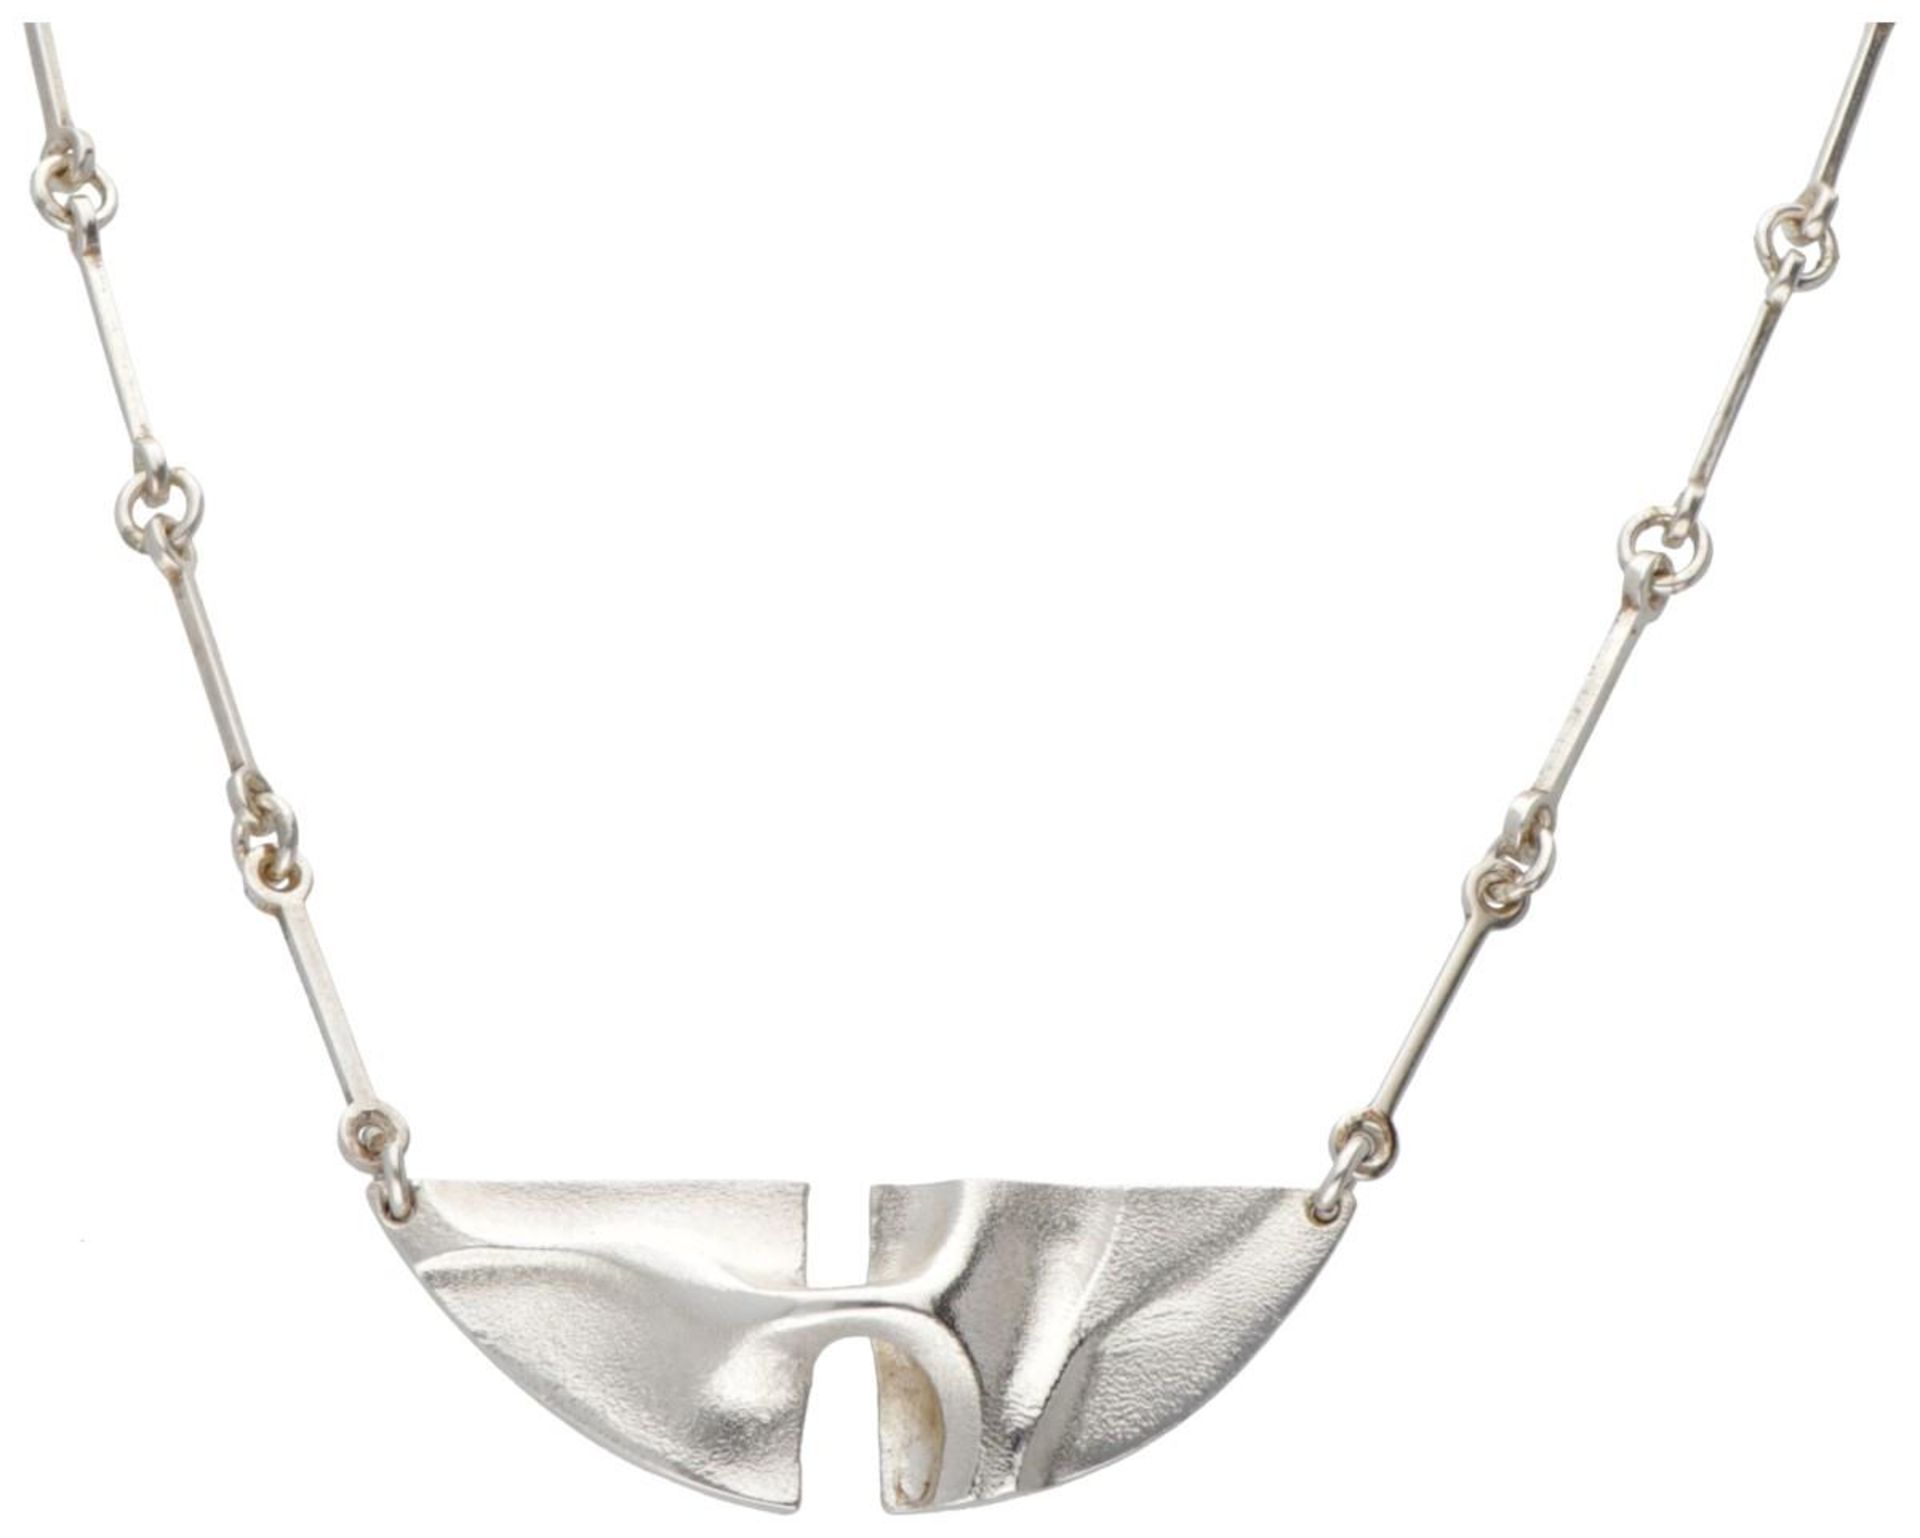 Sterling silver 'Viracocha' necklace by Björn Weckström for Lapponia.